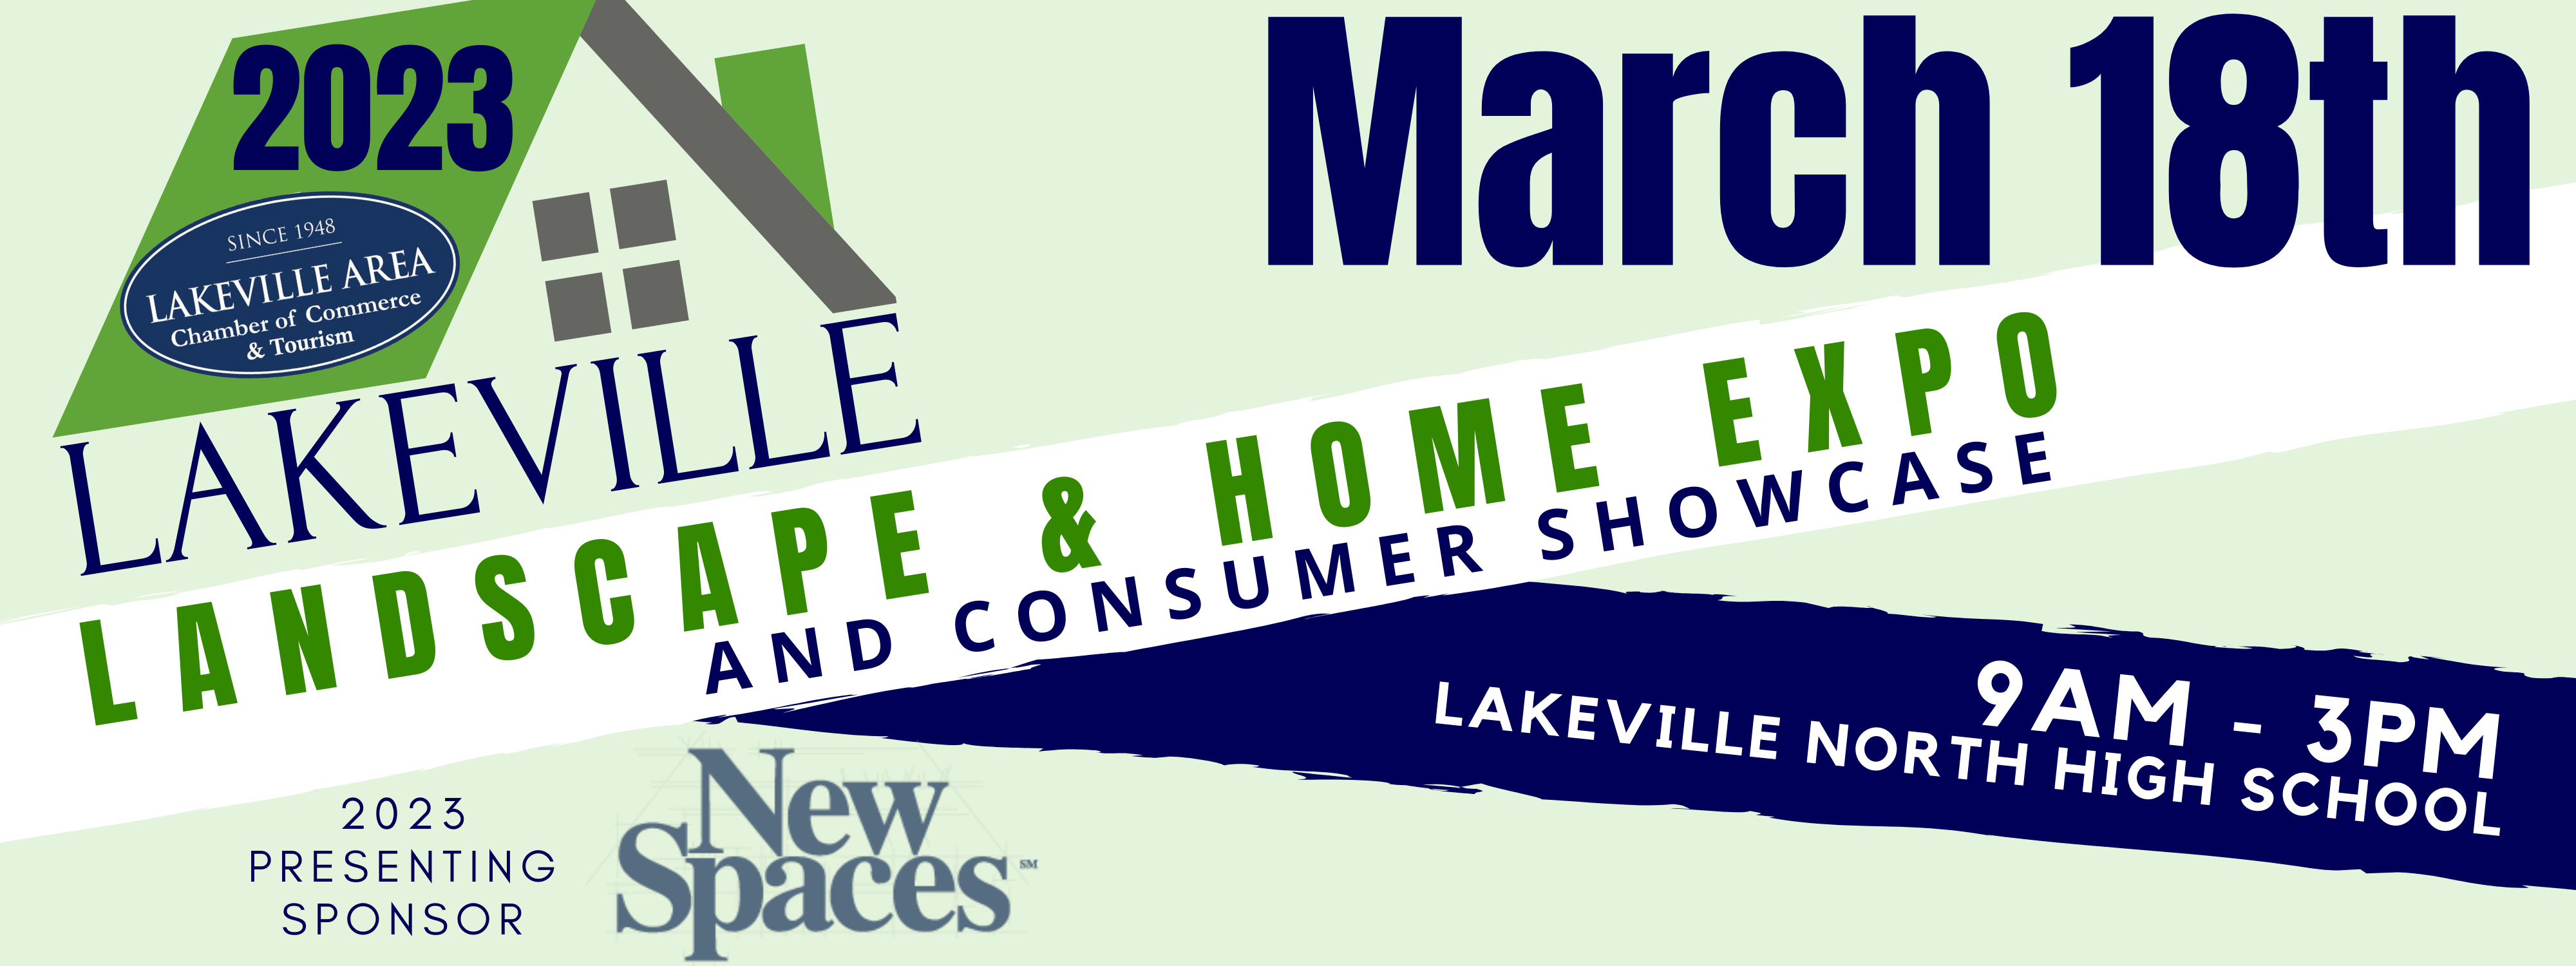 Lakeville Area Chamber Foundation